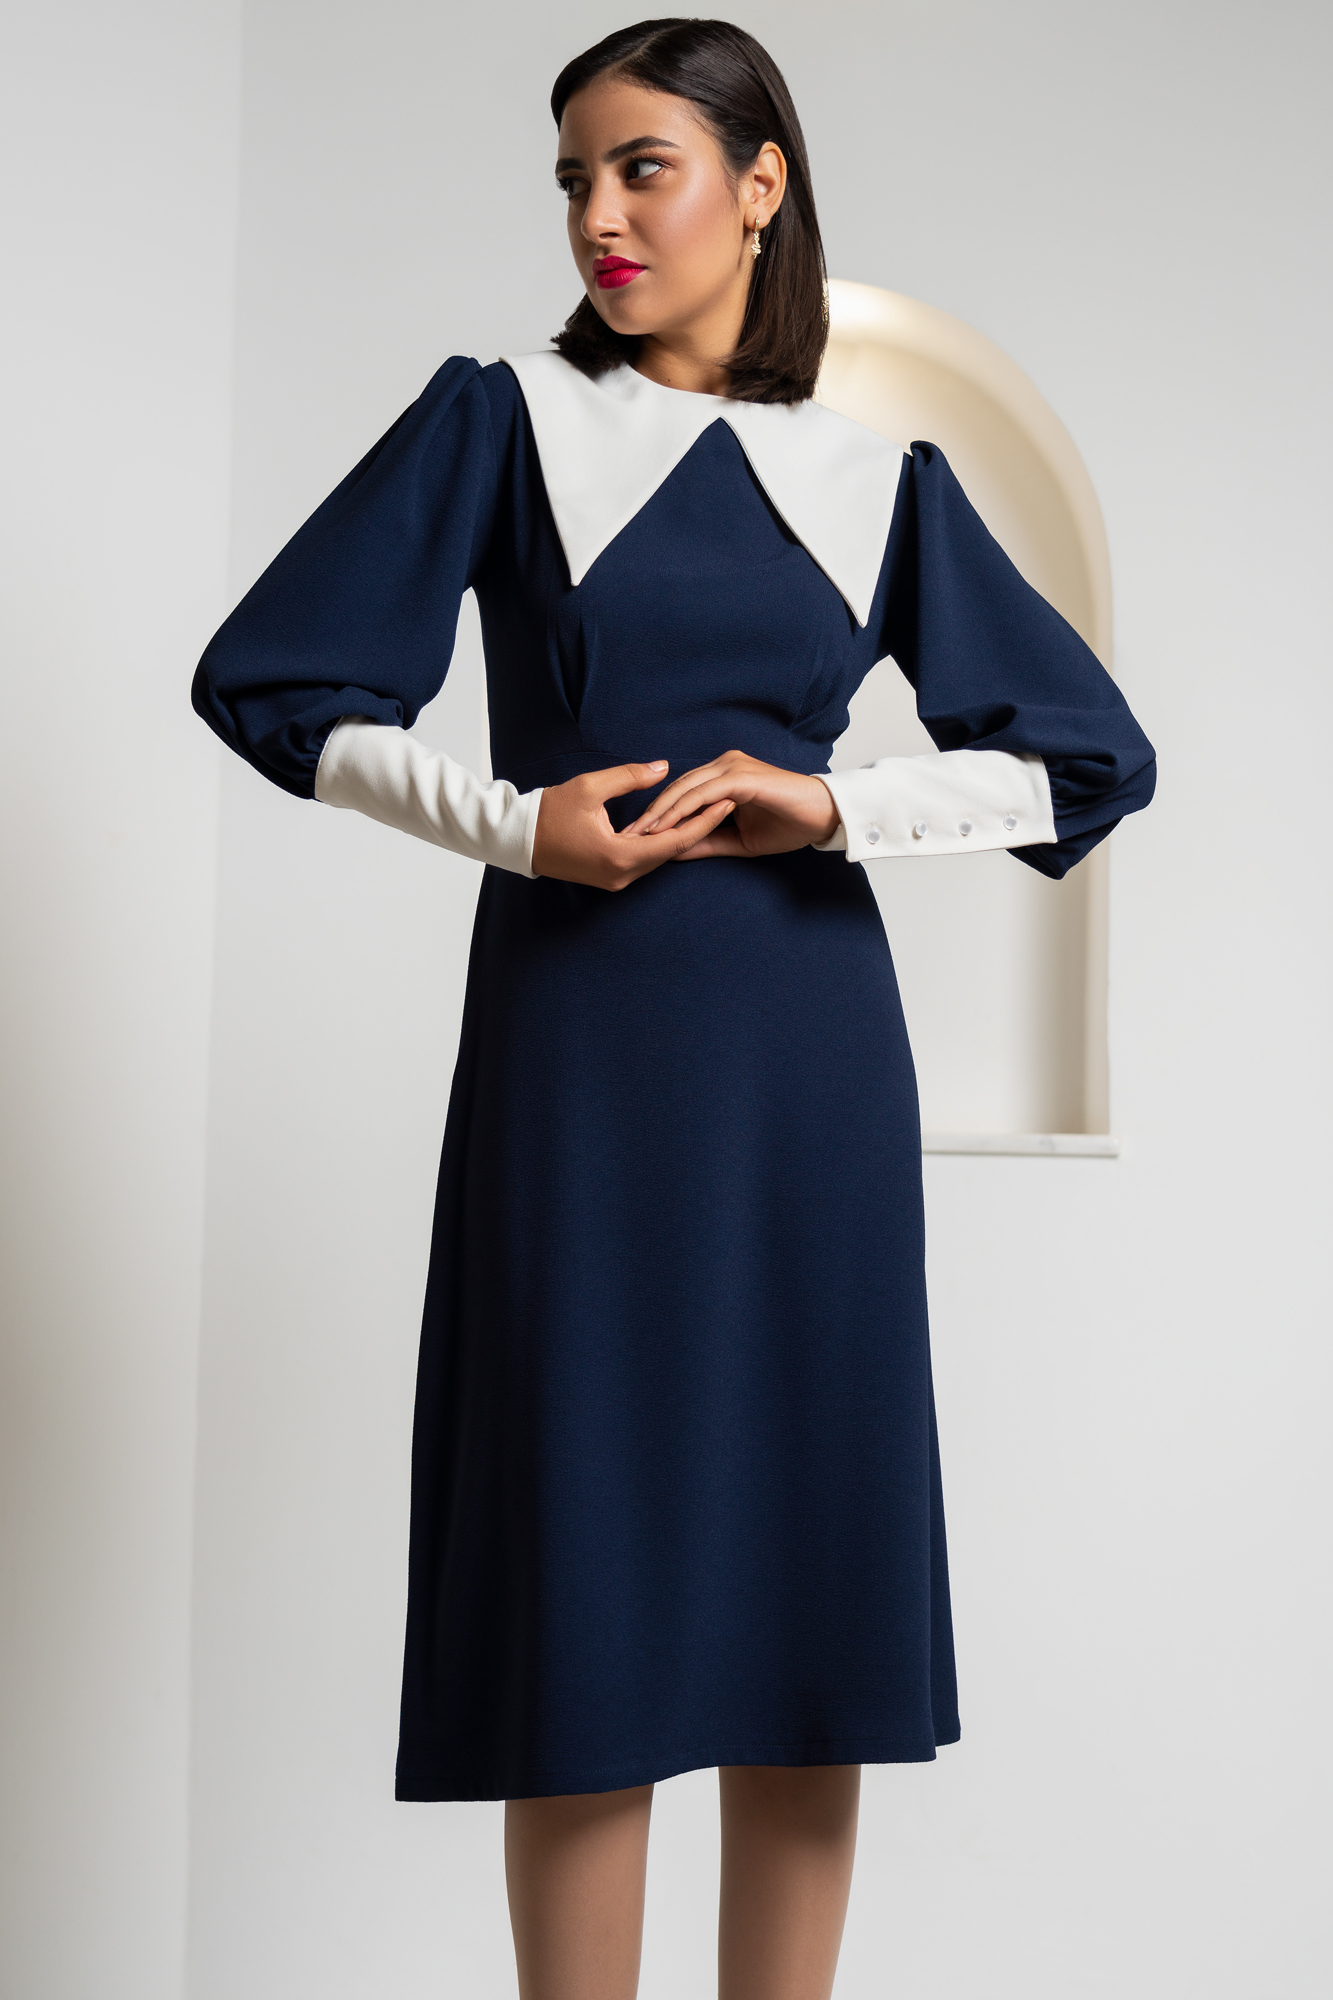 Contrast Collar Blue Dress With Faux Pearl Buttons